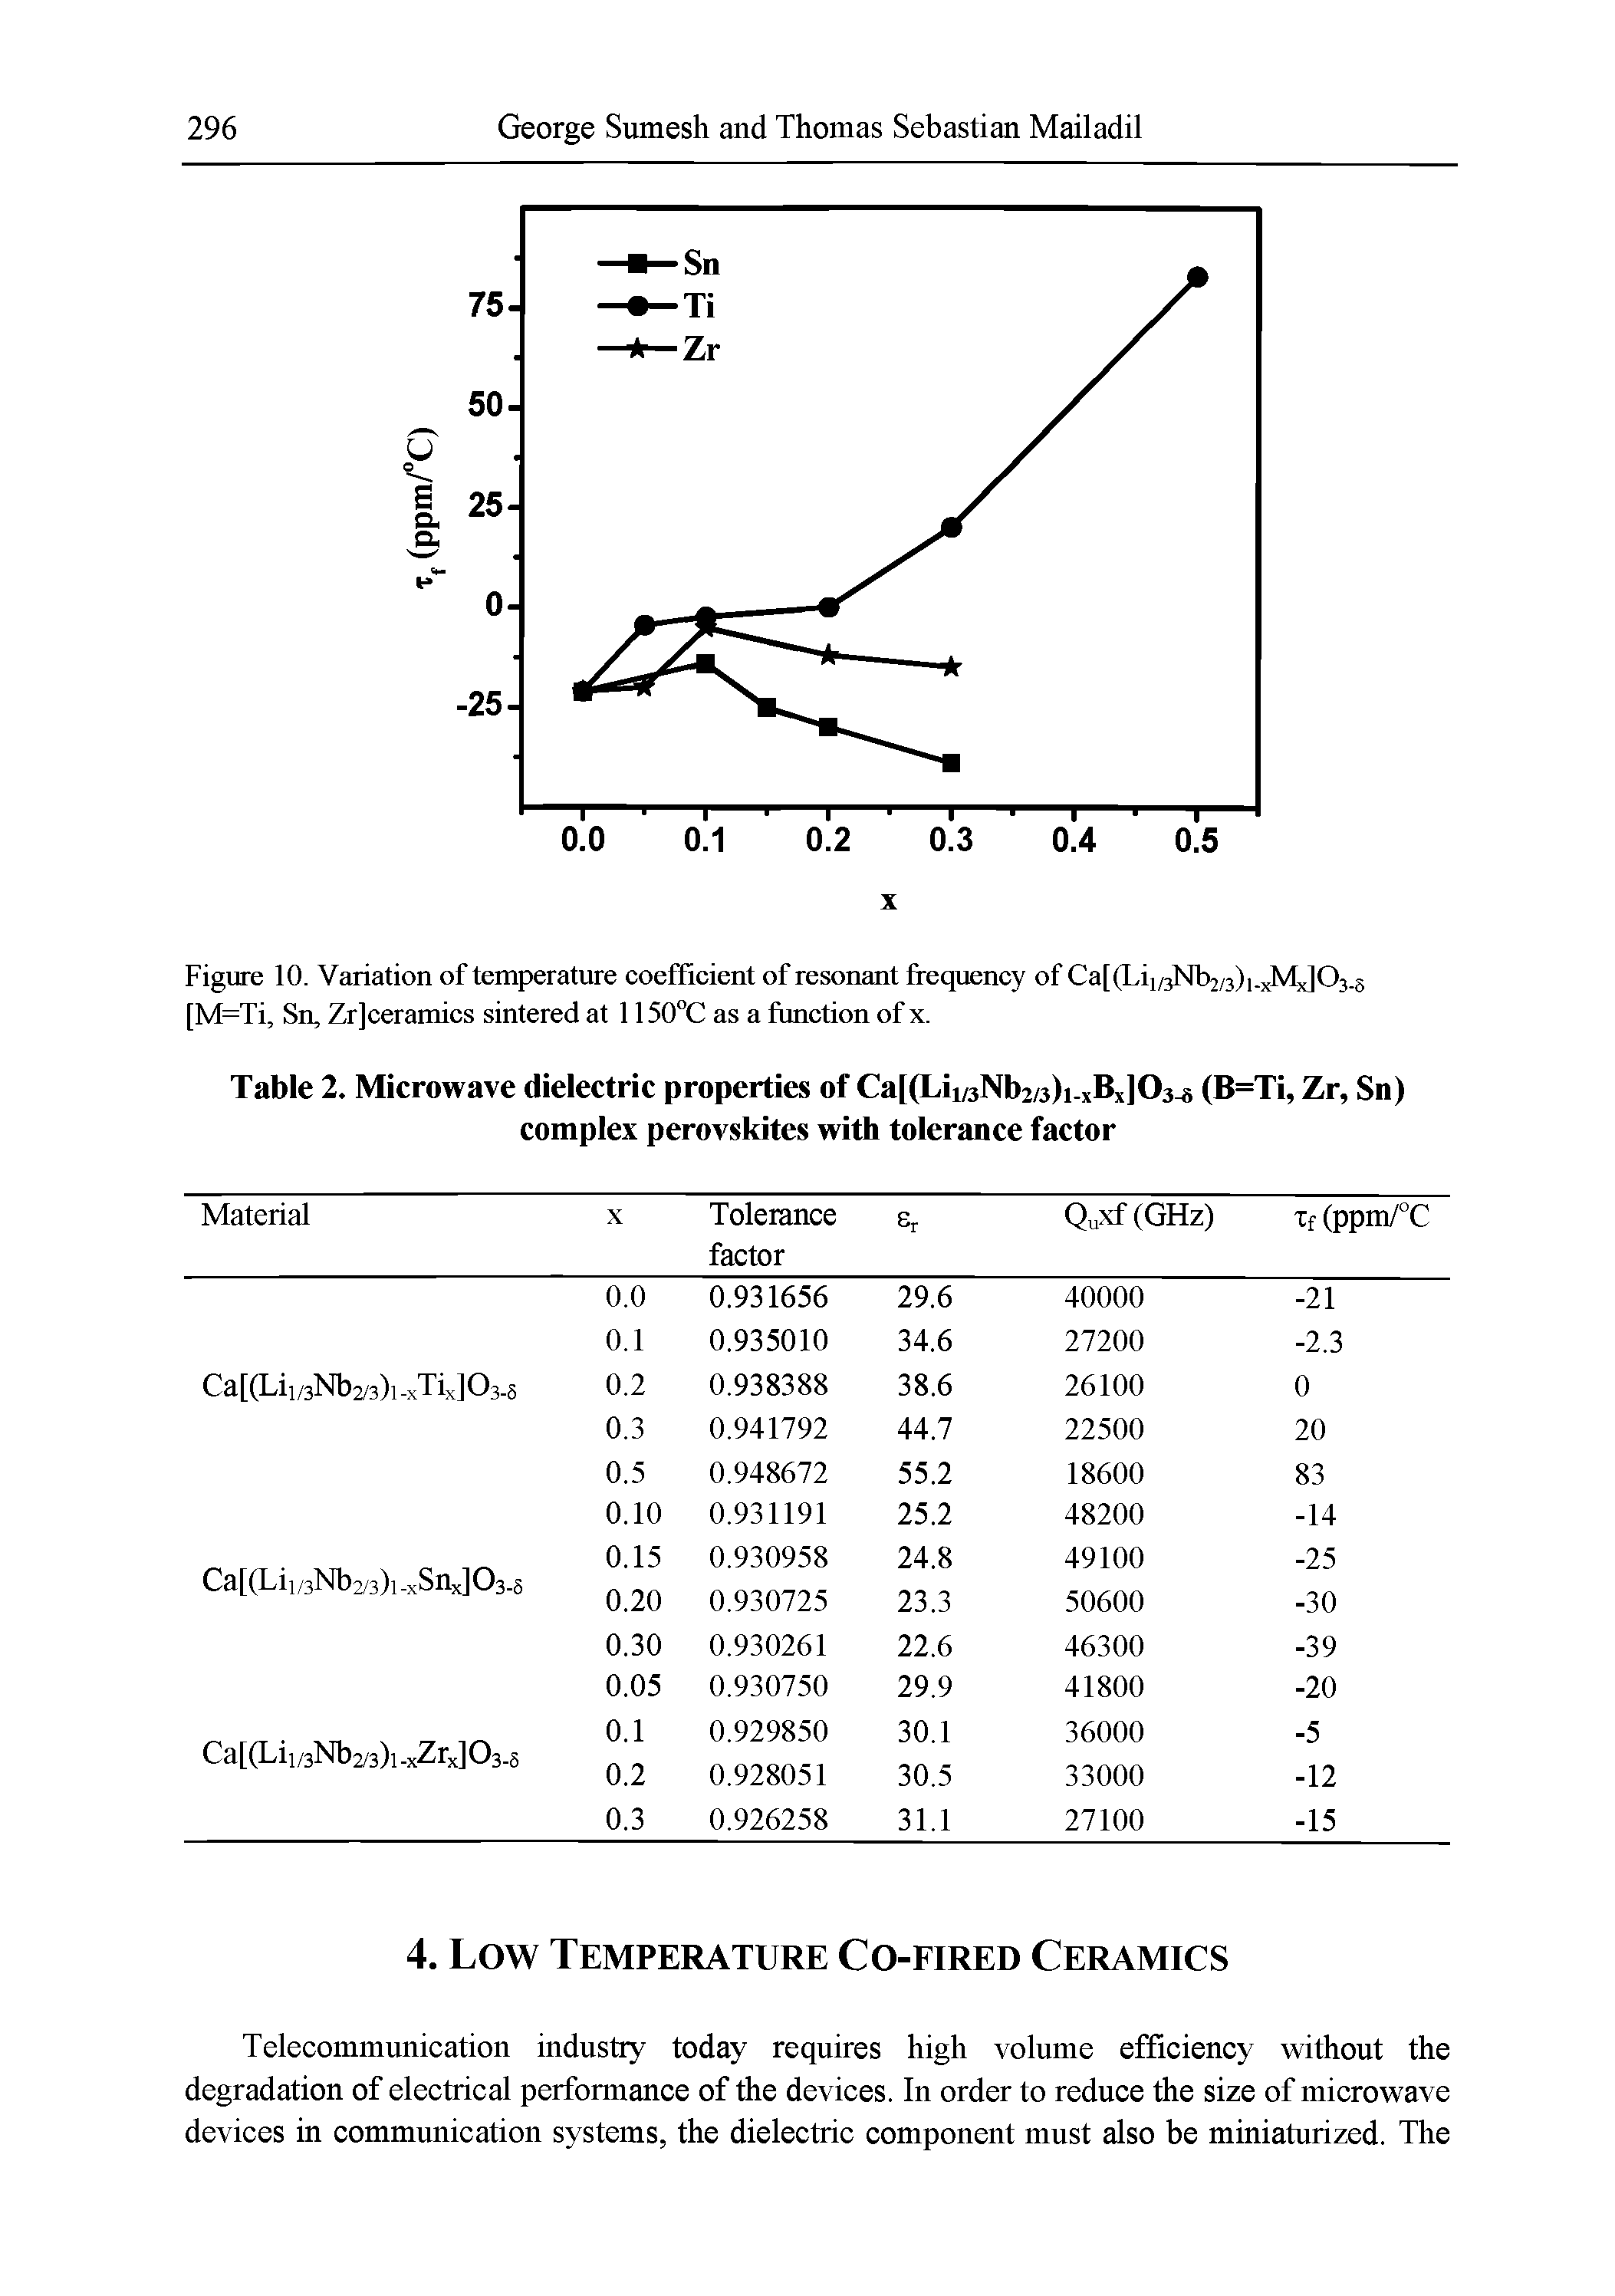 Figure 10. Variation of temperature coefficient of resonant frequency of Ca[(Lii/3Nb2/3)i.xMx]03.5 [M=Ti, Sn, Zrjceramics sintered at 1150 C as a function of x.